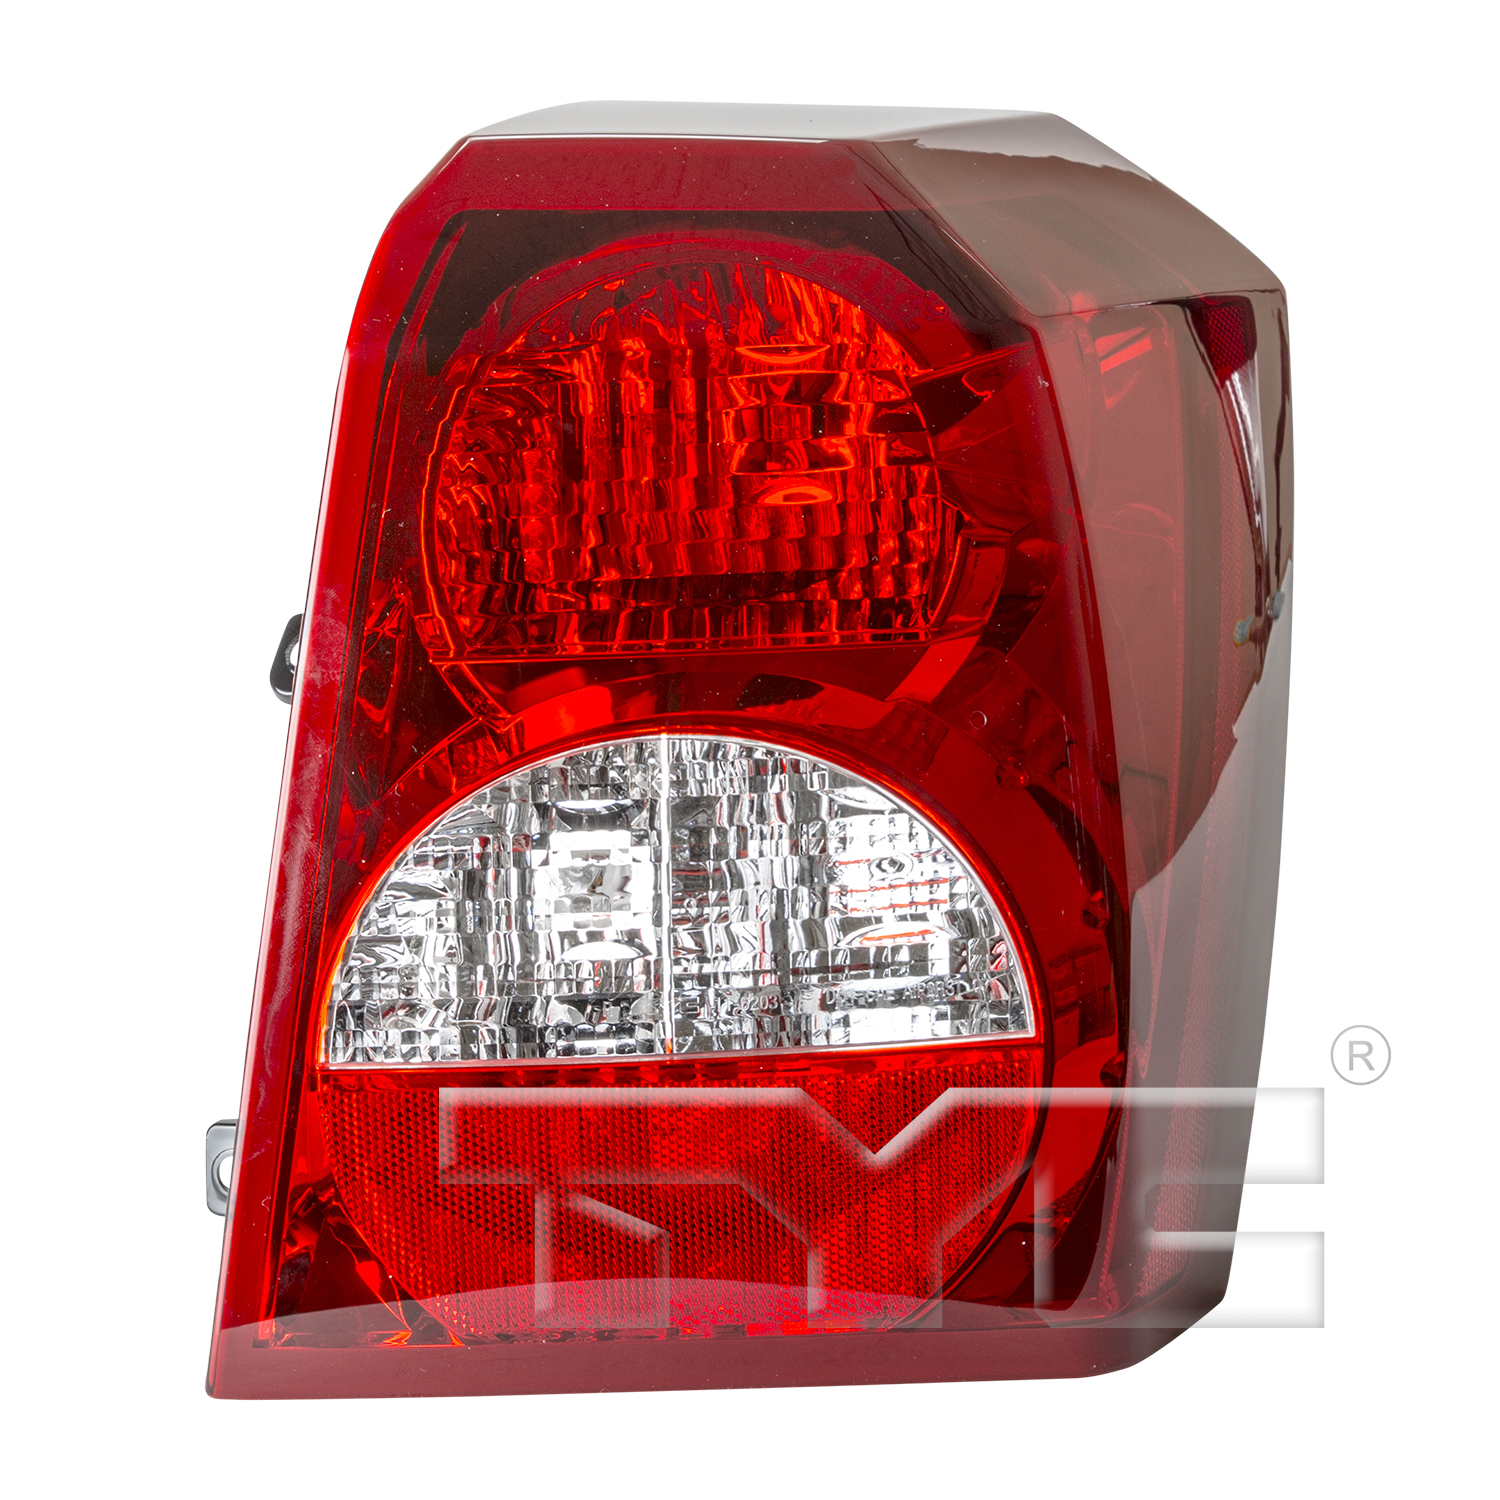 Aftermarket TAILLIGHTS for DODGE - CALIBER, CALIBER,08-12,RT Taillamp assy